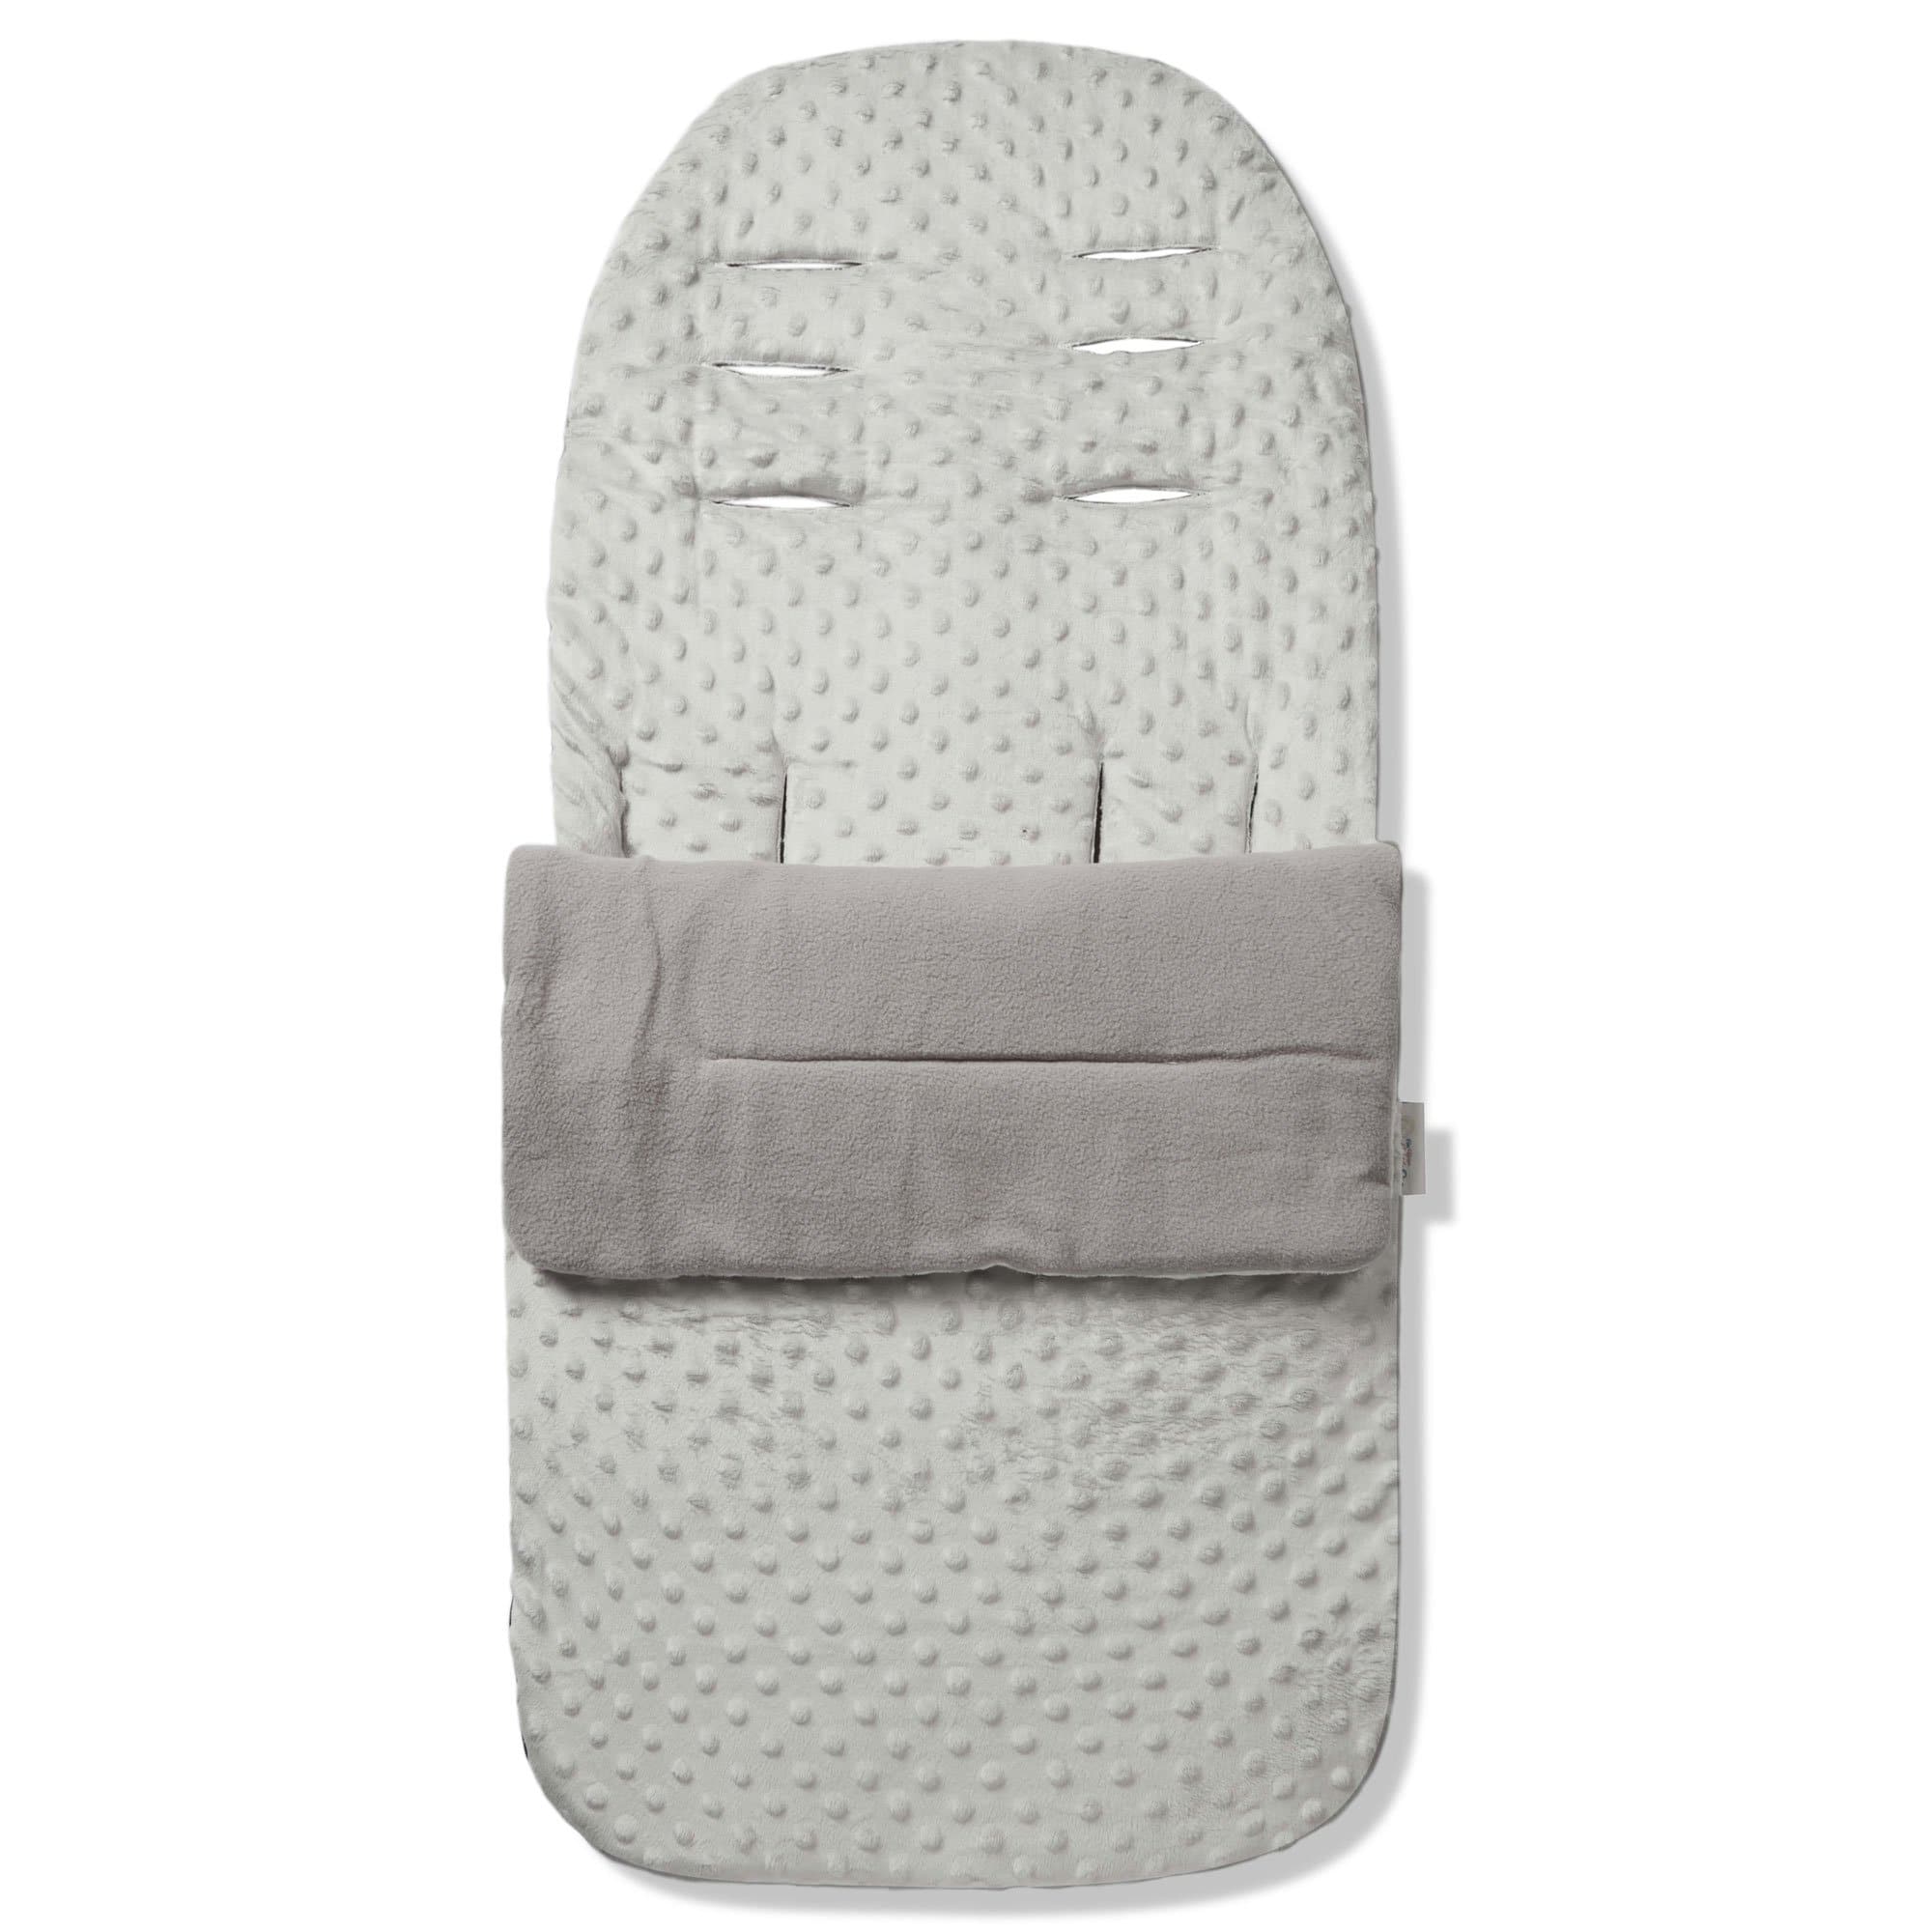 Dimple Footmuff / Cosy Toes Compatible with Valco - Grey / Fits All Models | For Your Little One